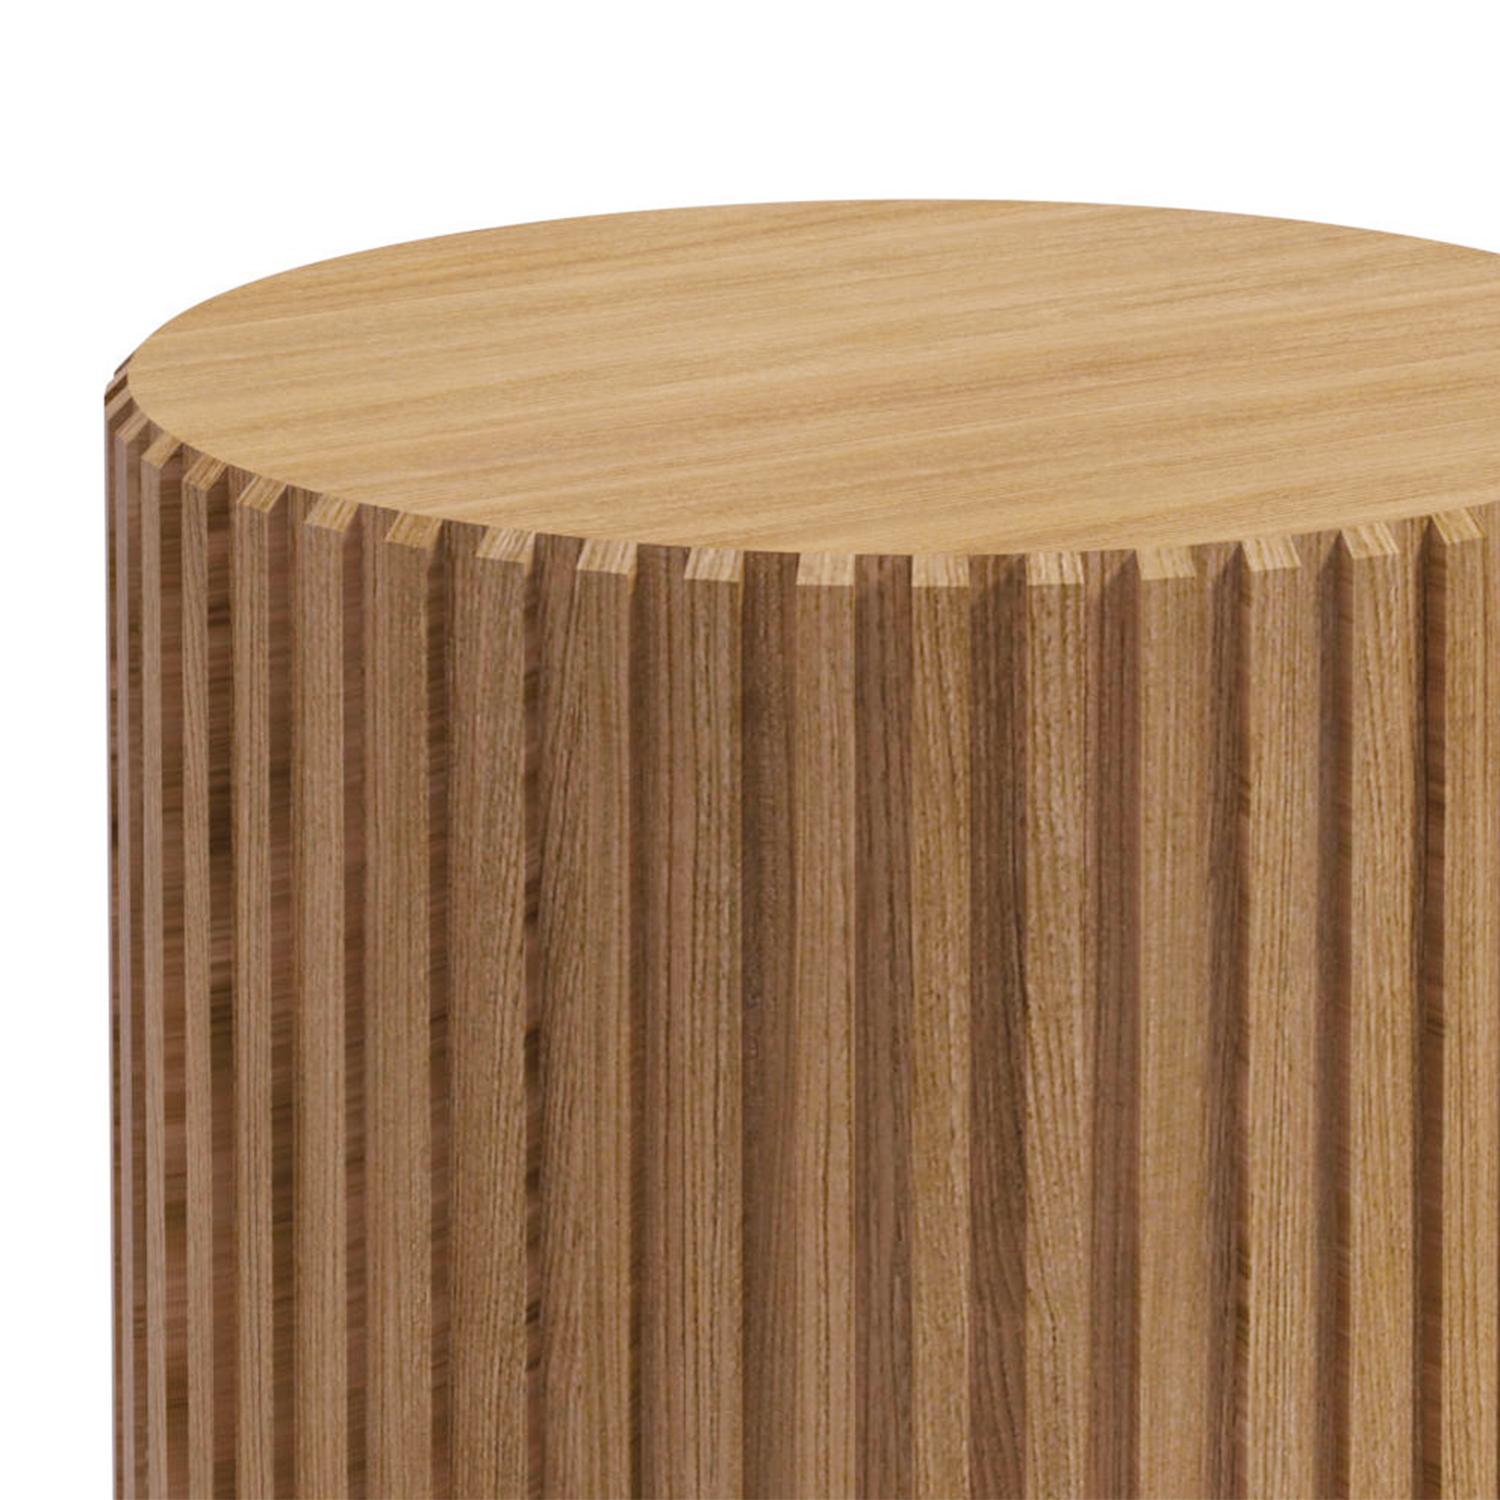 Side table deck teak all made in
Natural solid teak, hand-crafted full
Teak side table with trims and flat top.